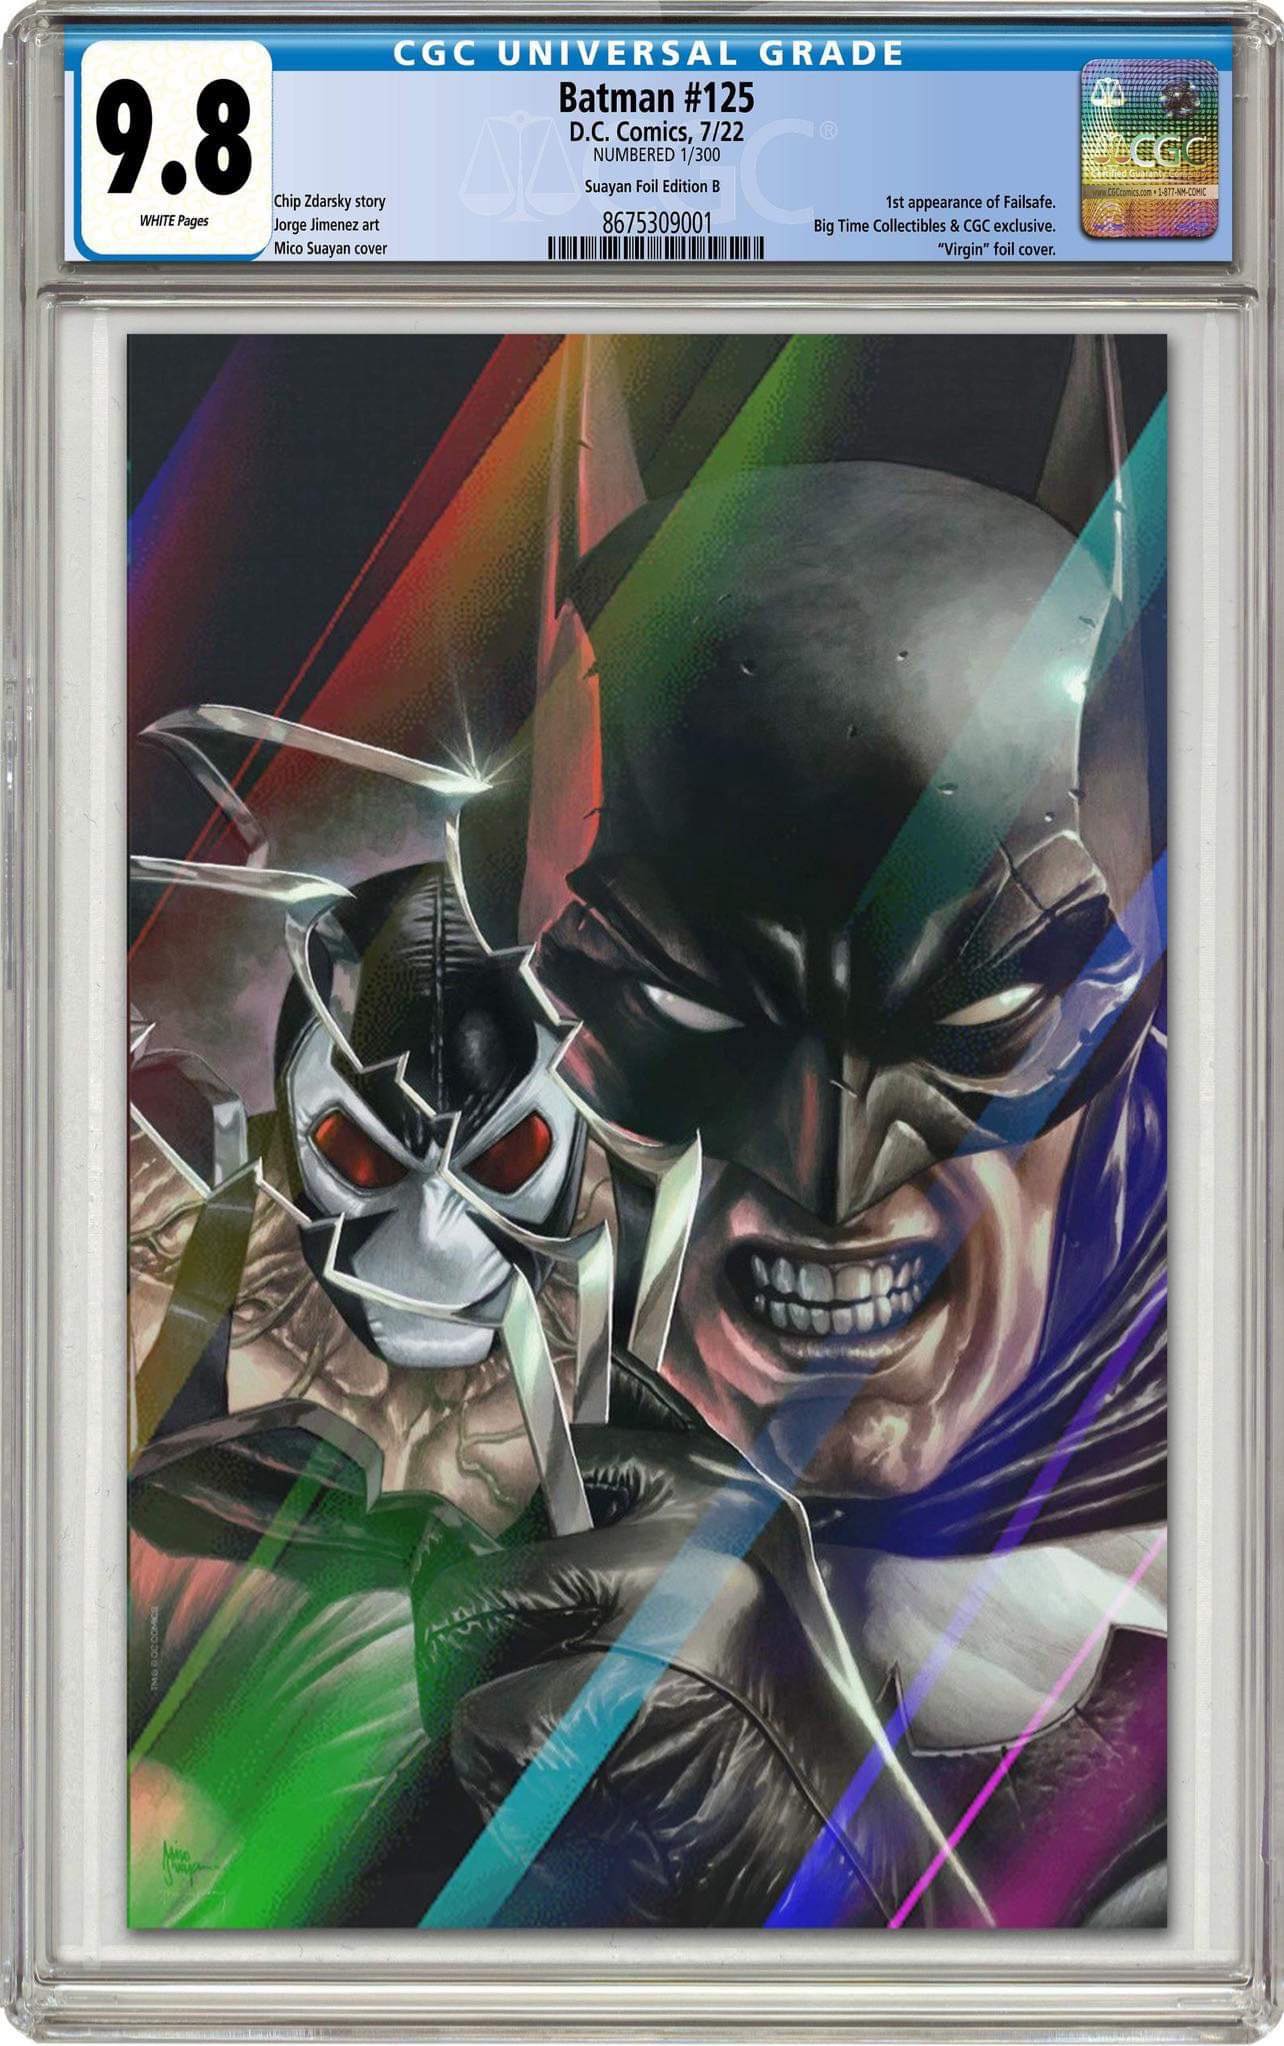 BATMAN #125 MICO SUAYAN CGC EXCLUSIVE FOIL VARIANT COVERS CGC 9.8 LIMITED TO 300 COPIES